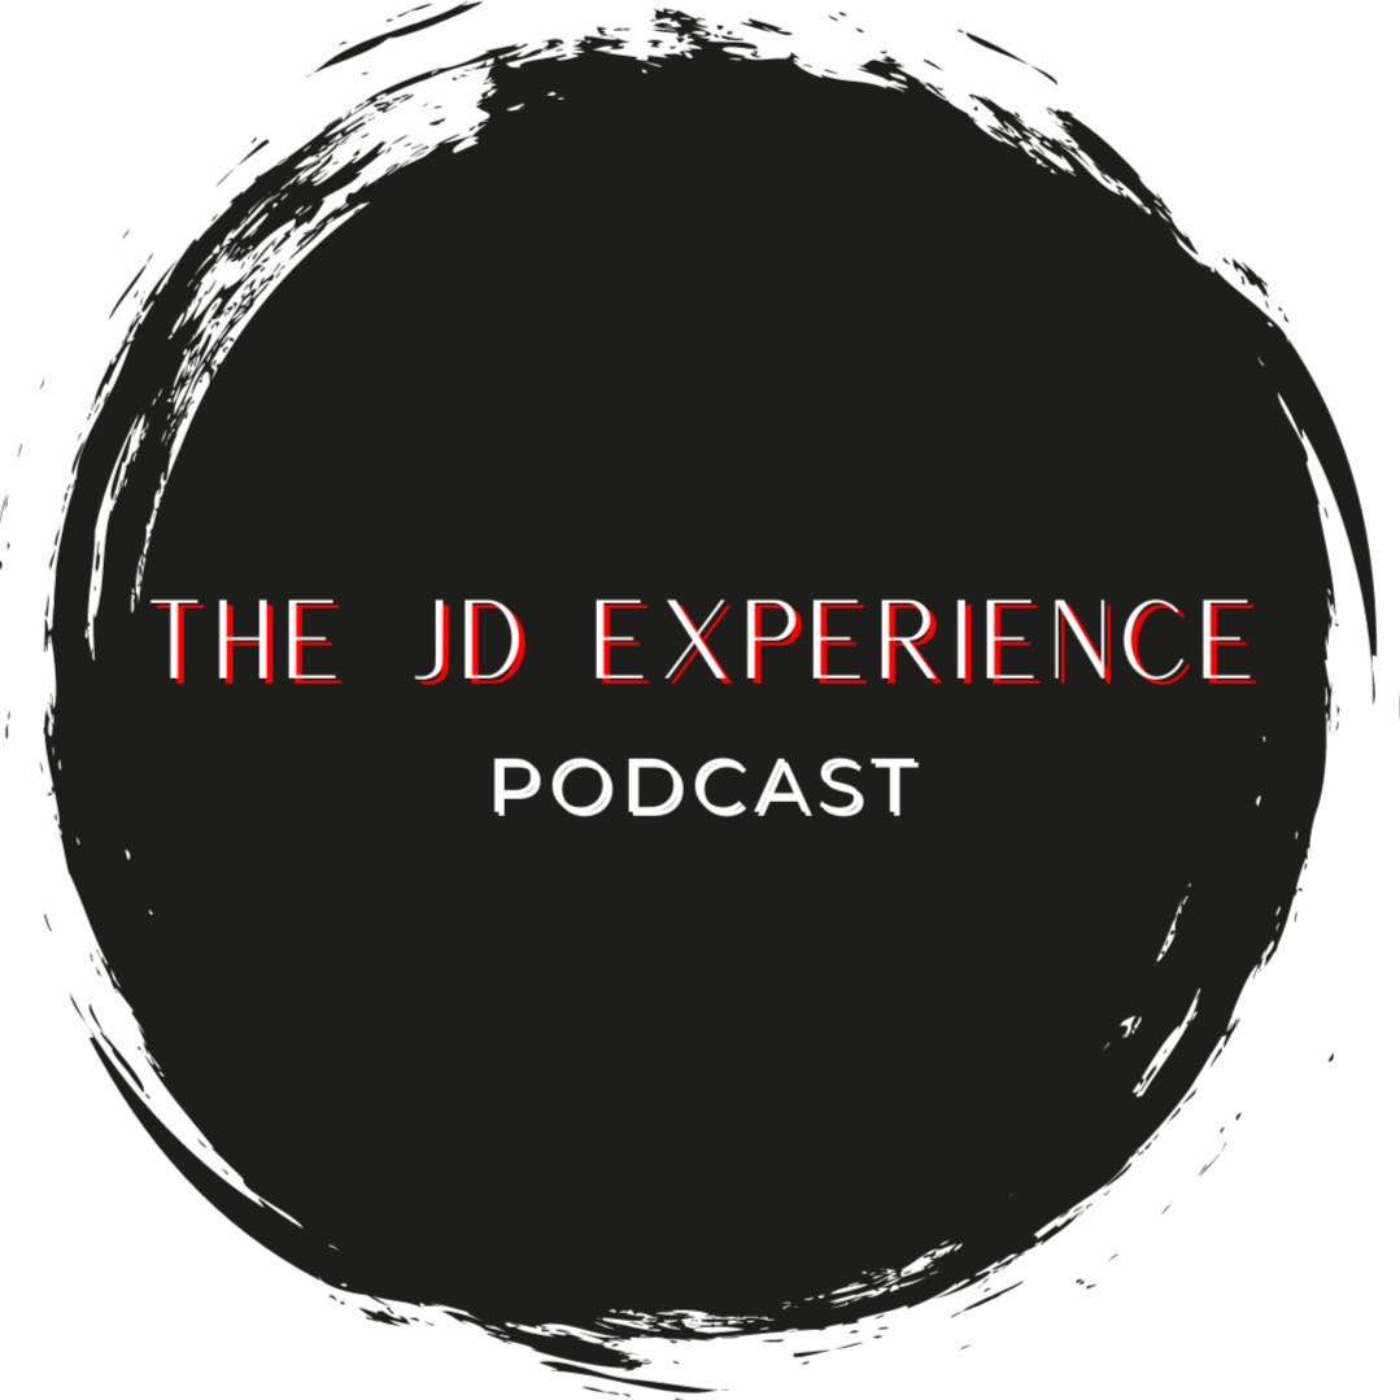 THE JD EXPERIENCE PODCAST EPISODE 12